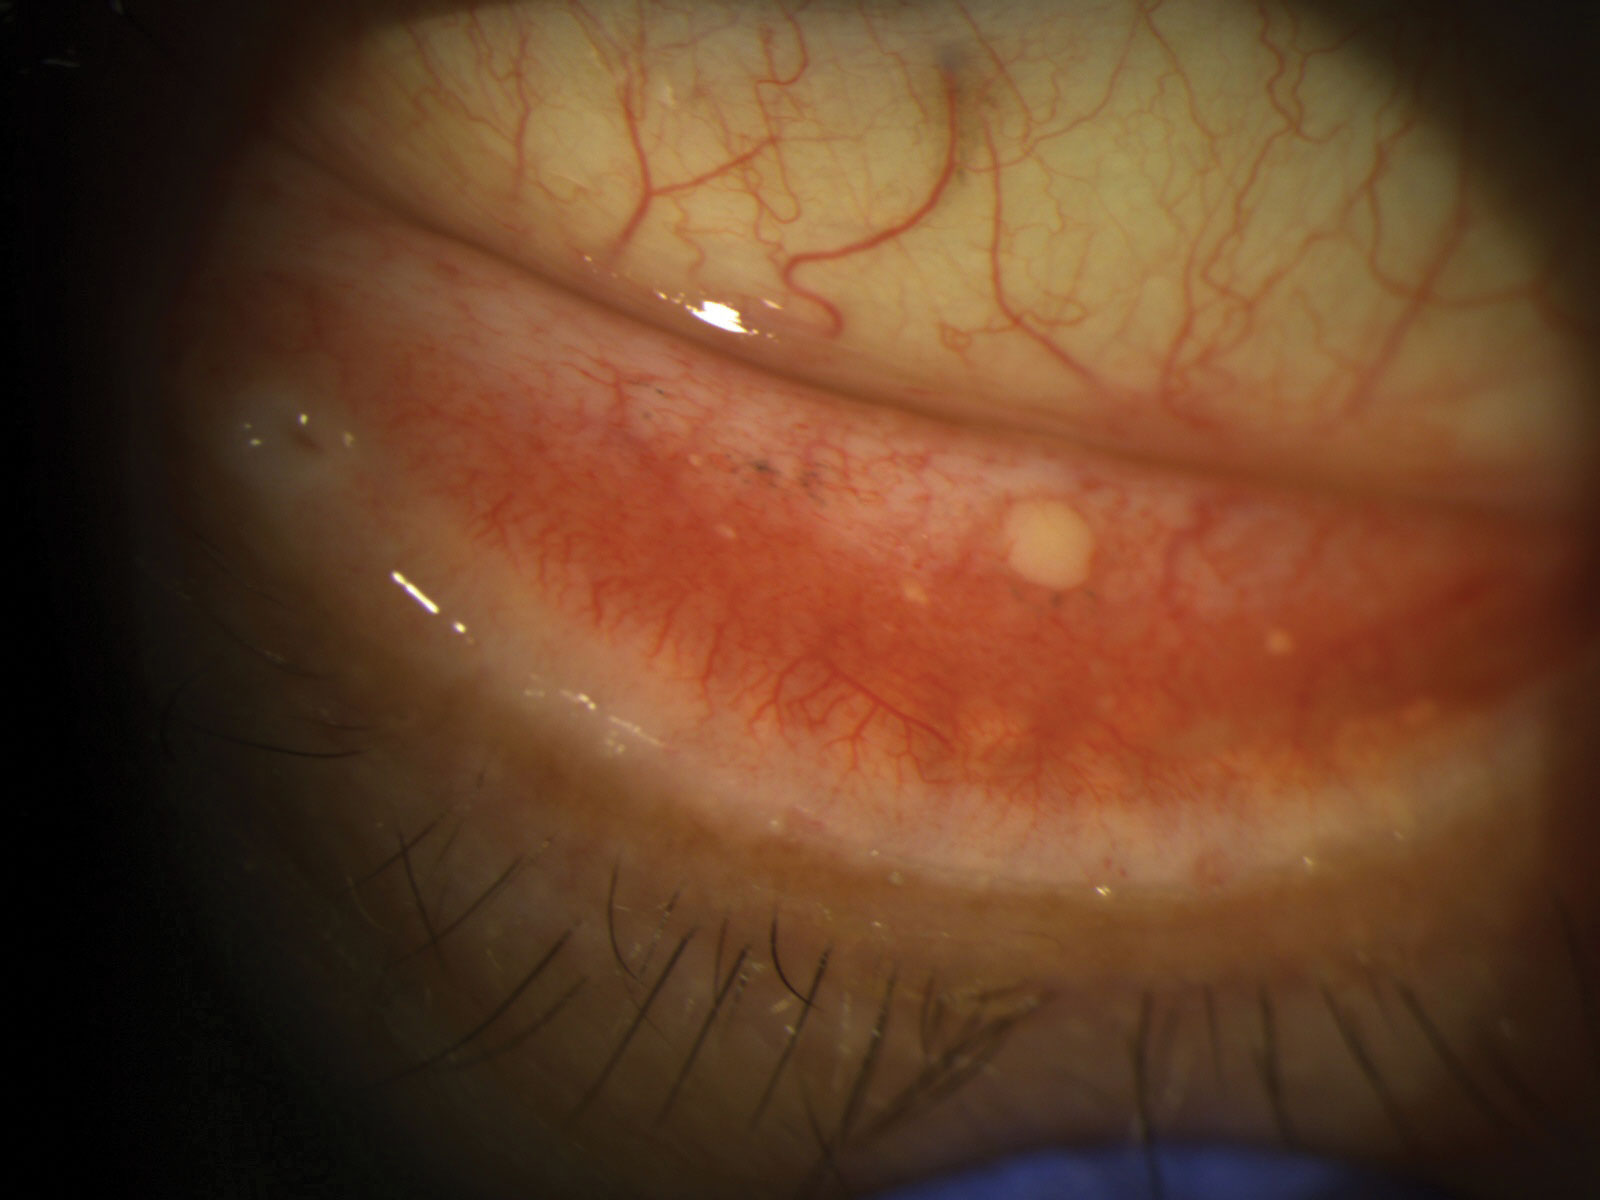 Chronic ocular allergies can sometimes result in conjunctival concretions. This patient had complaints of persistent foreign body sensation, which resolved once the concretion was excised.